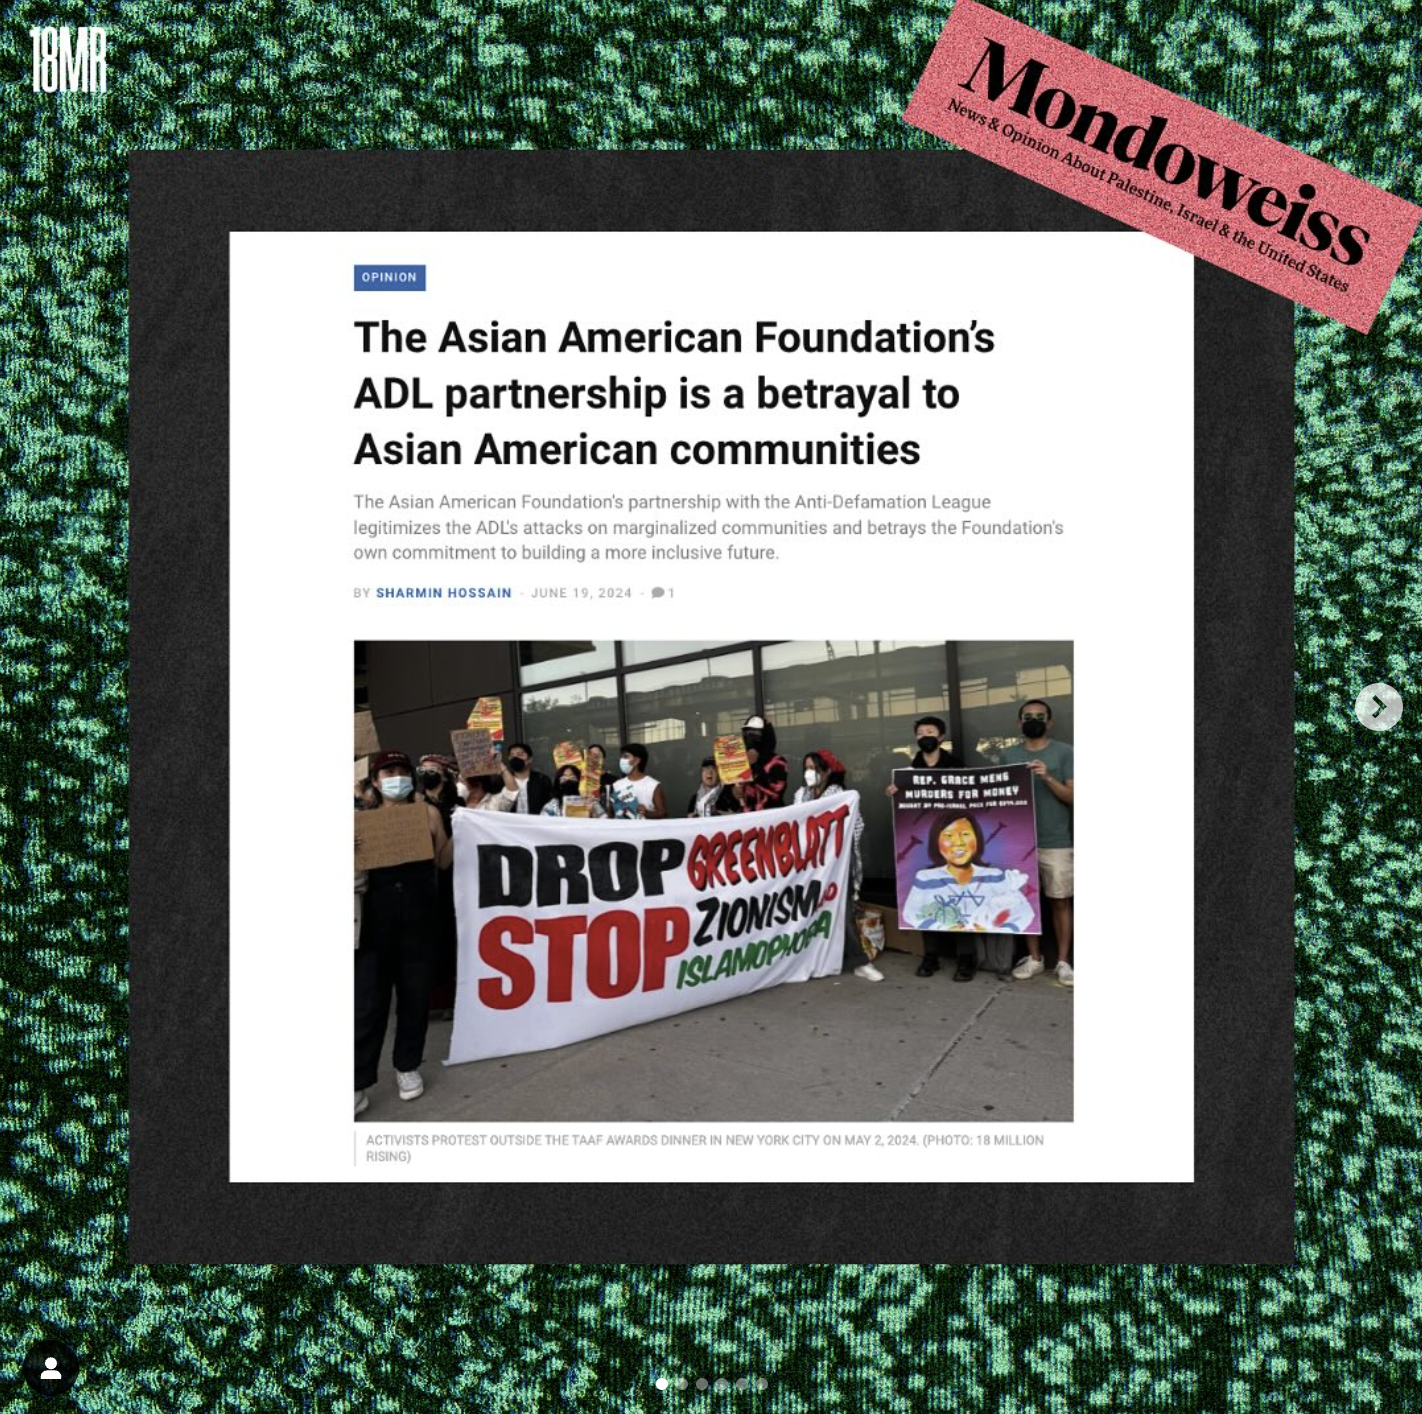 Green staticky background with black bix in front of it, with a screenshot of an article that says, "The Asian Foundation's ADL Partnership is a betrayal to Asian American communities". In the article shows protesters with masks, holding signs, and a large banner that says "Drop Greenblatt, Stop Zionism & Islamophobia". On the top right corner in pink shows the Mondoweiss logo, on the top left, is the 18MR logo.